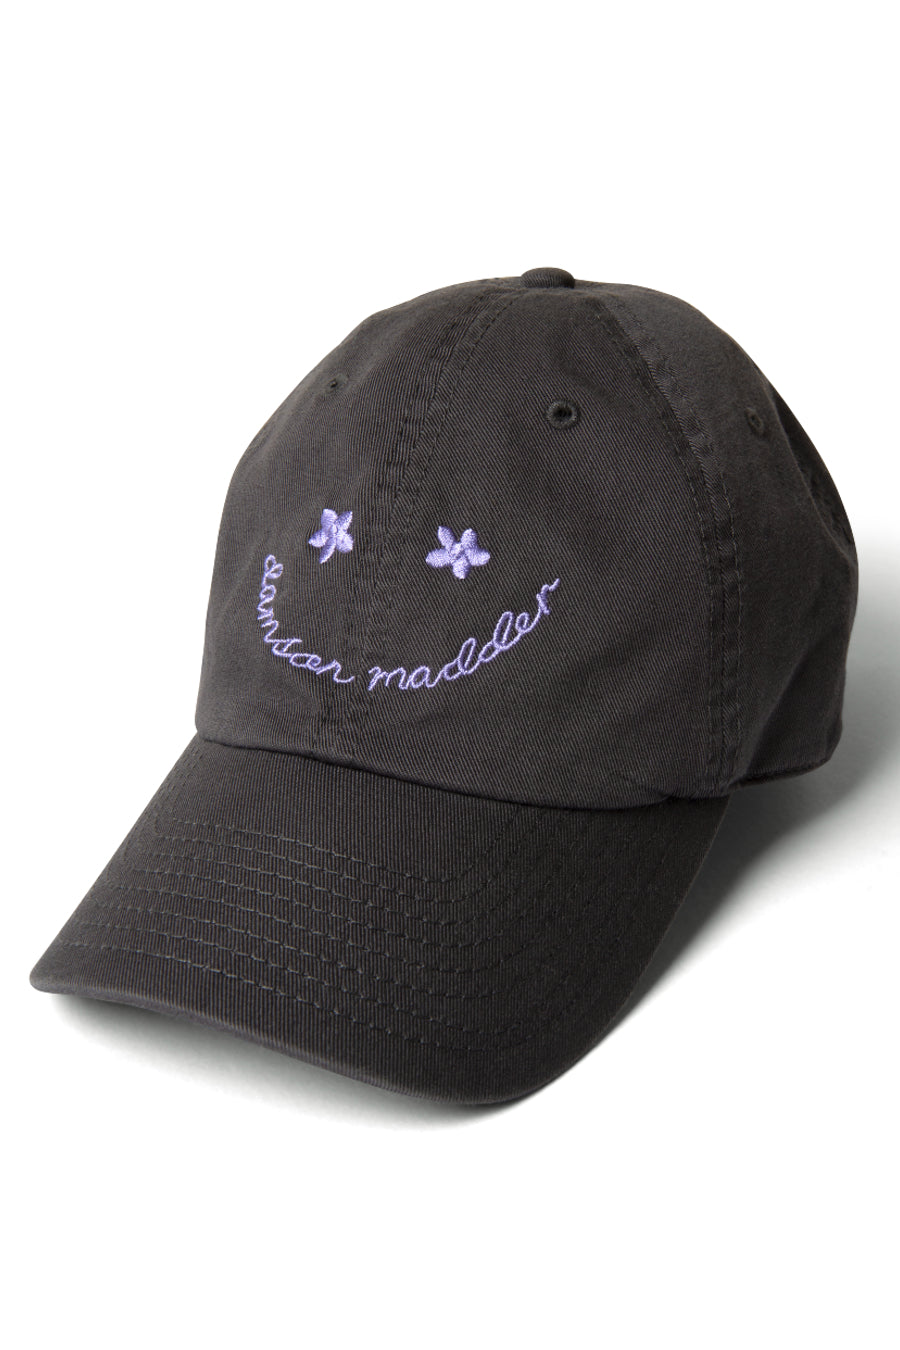 smiley cap with lilac embroidery - web exclusive